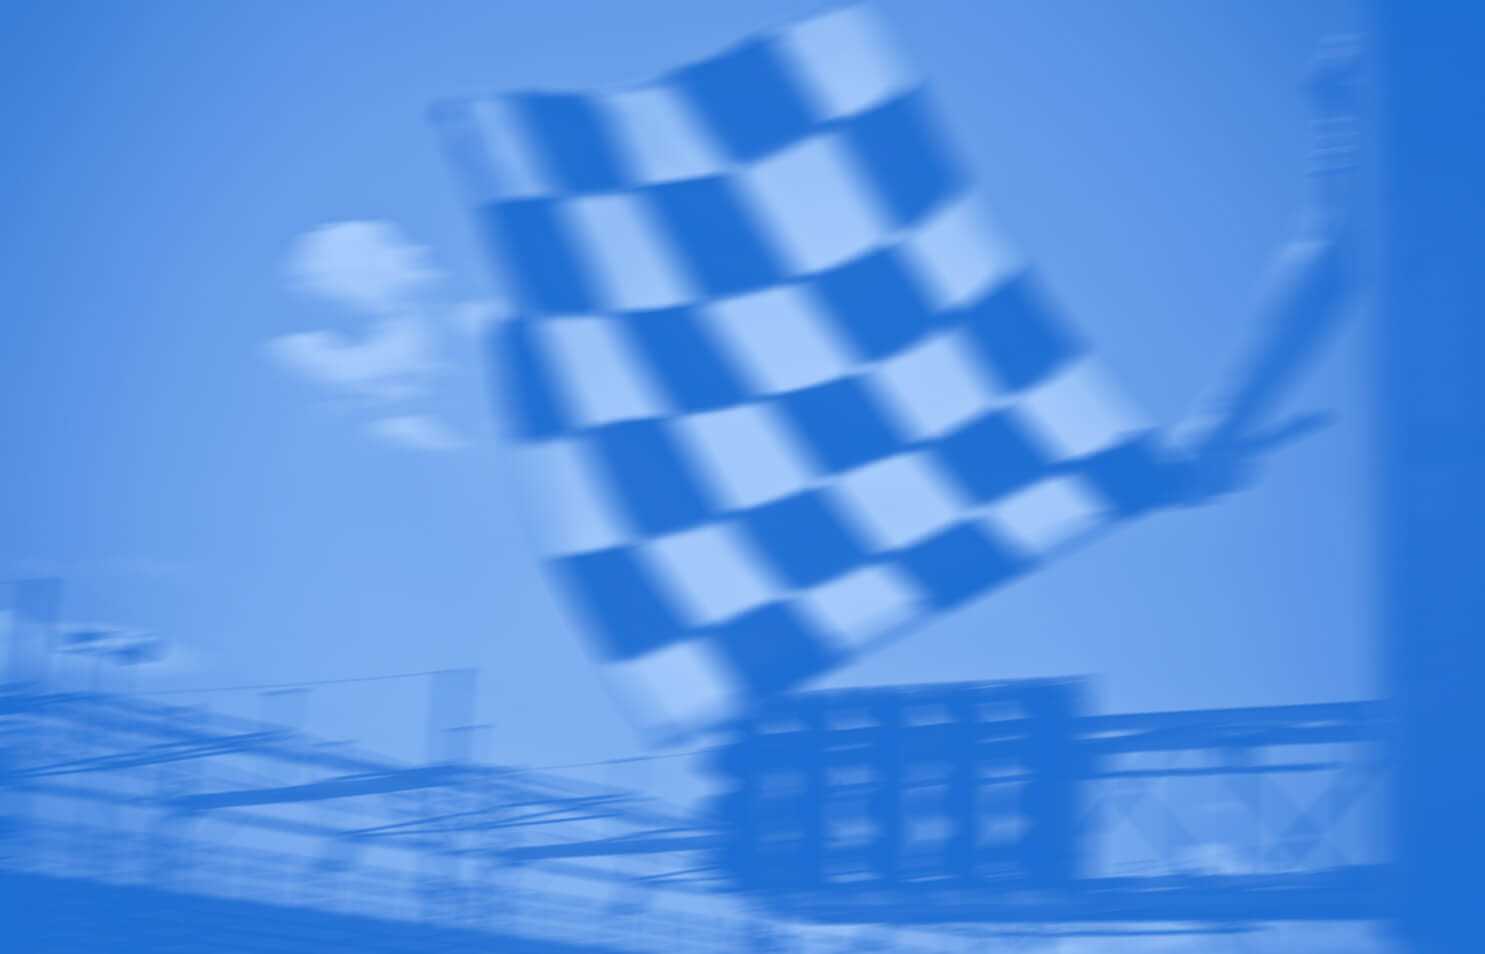 Checkered flag being waved at car race